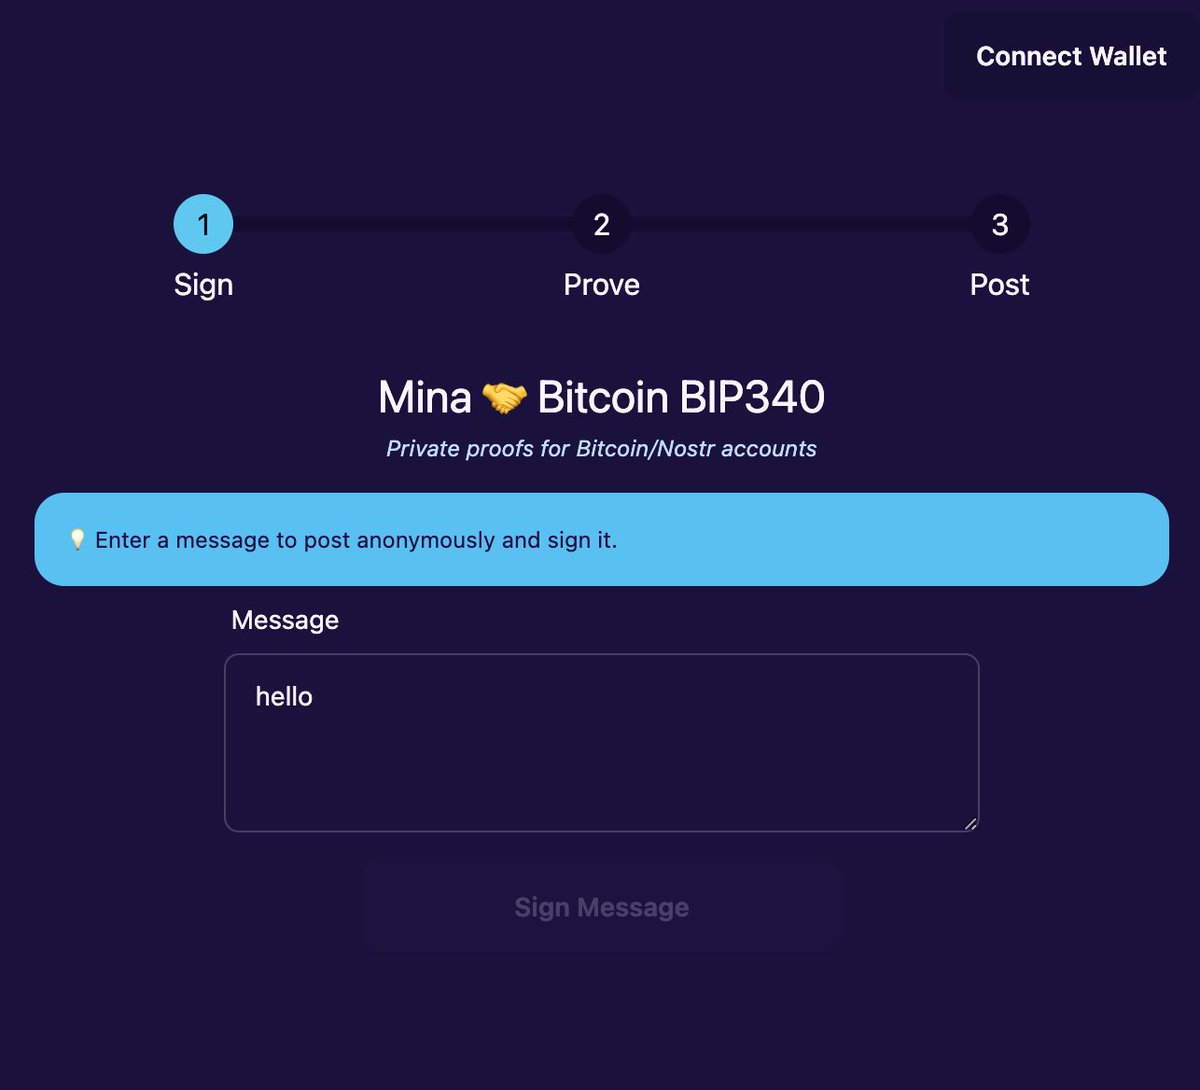 Mina 🤝 Bitcoin BIP340 - April update for Mina-anons 🥷 Bitcoin BIP340 Schnorr signature verification proof can now be made in @MinaProtocol #o1js Demo: mina-anons.vercel.app/demo-nostr